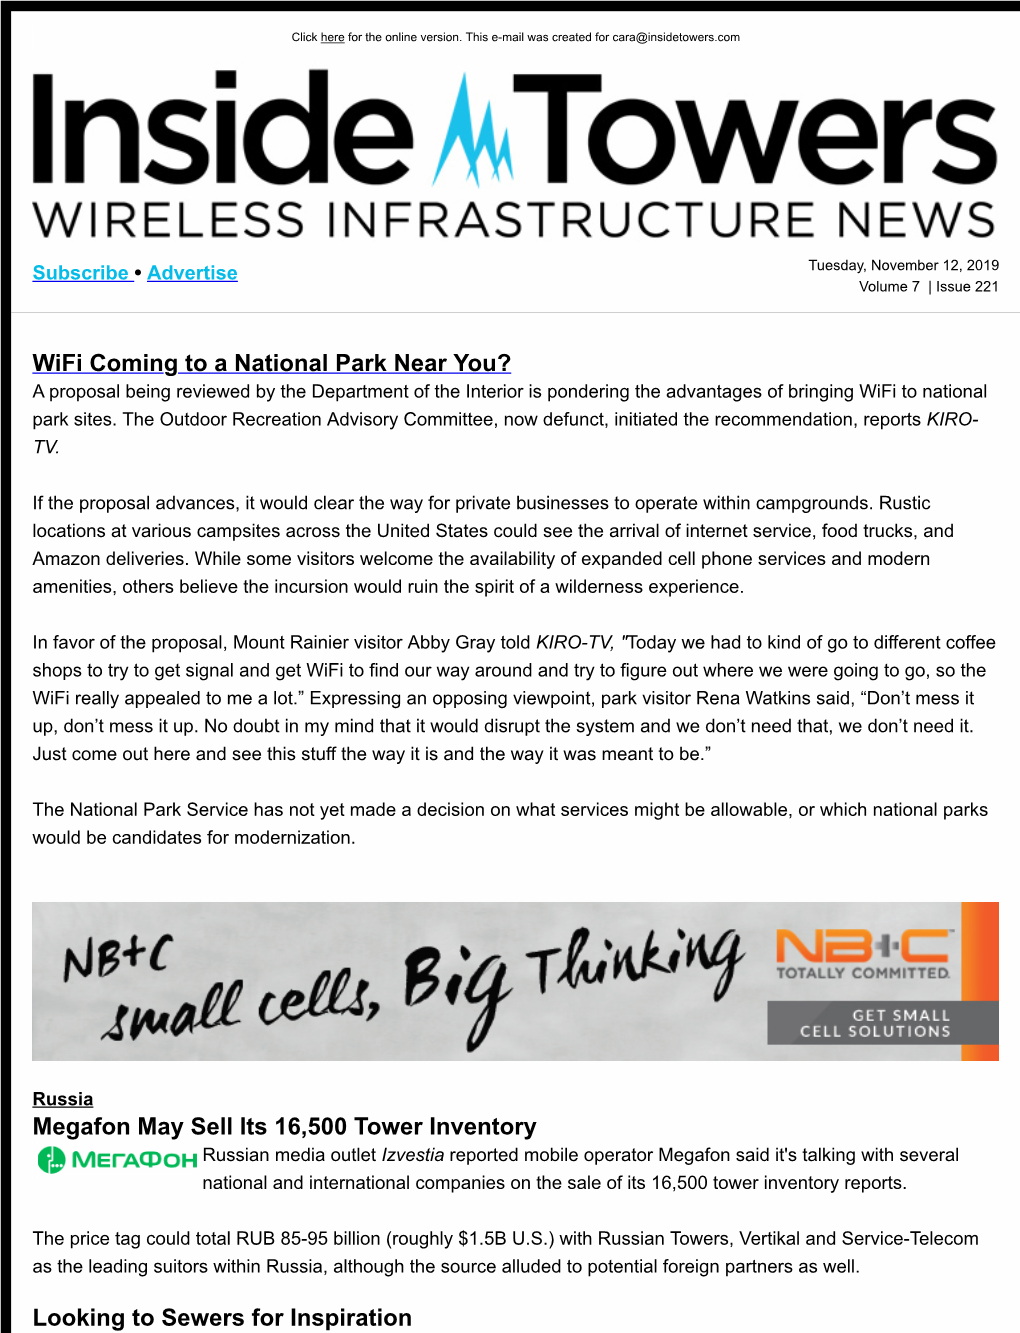 Wifi Coming to a National Park Near You? Megafon May Sell Its 16,500 Tower Inventory Looking to Sewers for Inspiration